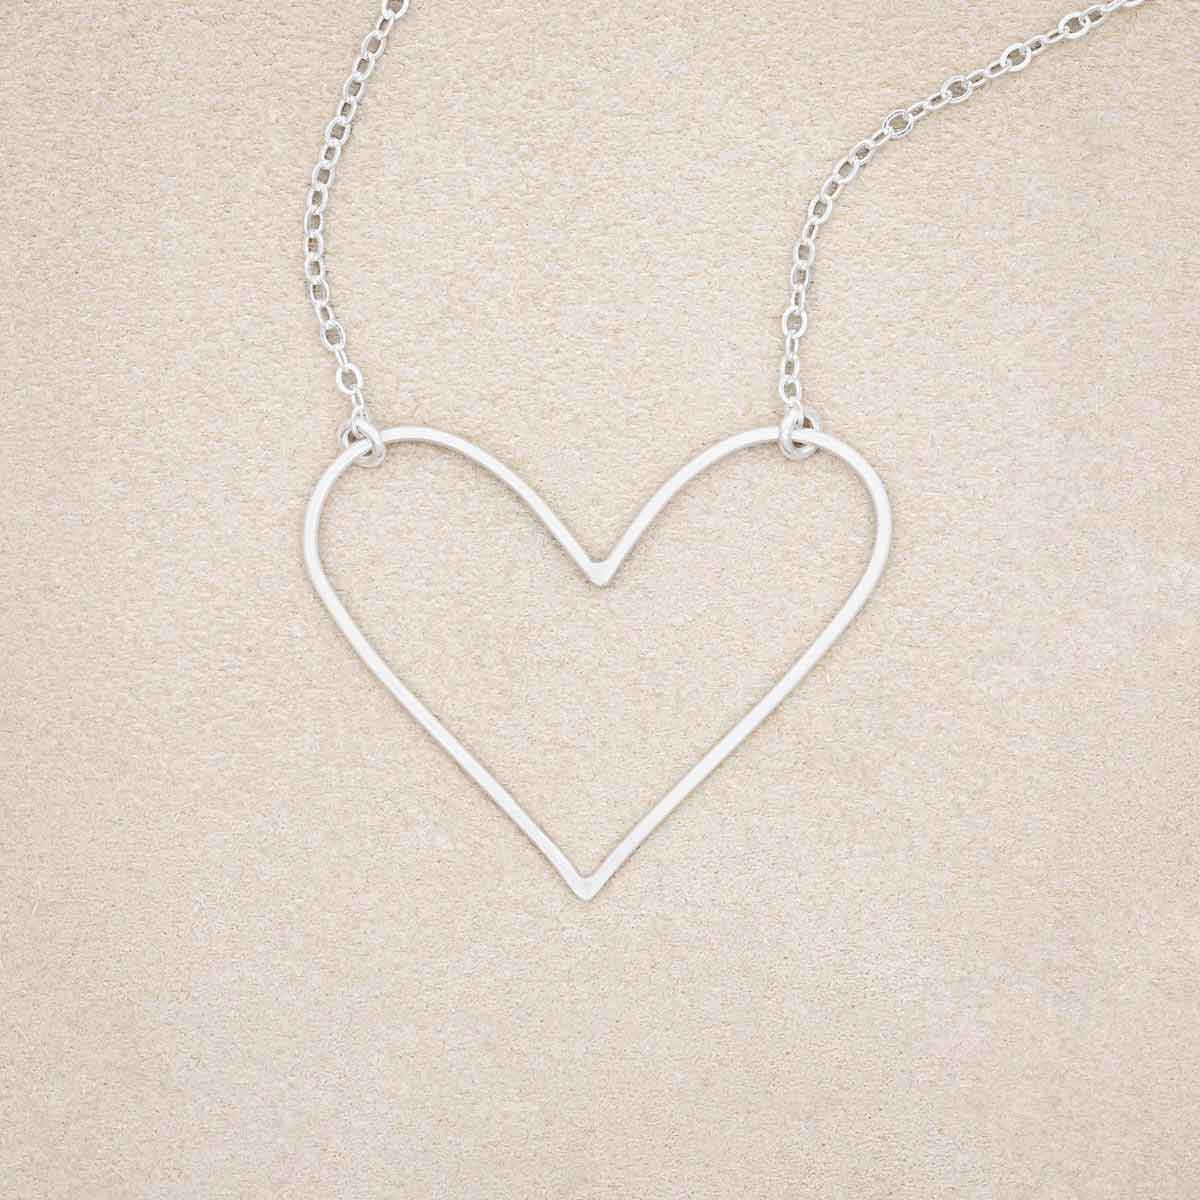 Image of Petite Peaceful Heart Necklace {Sterling Silver}